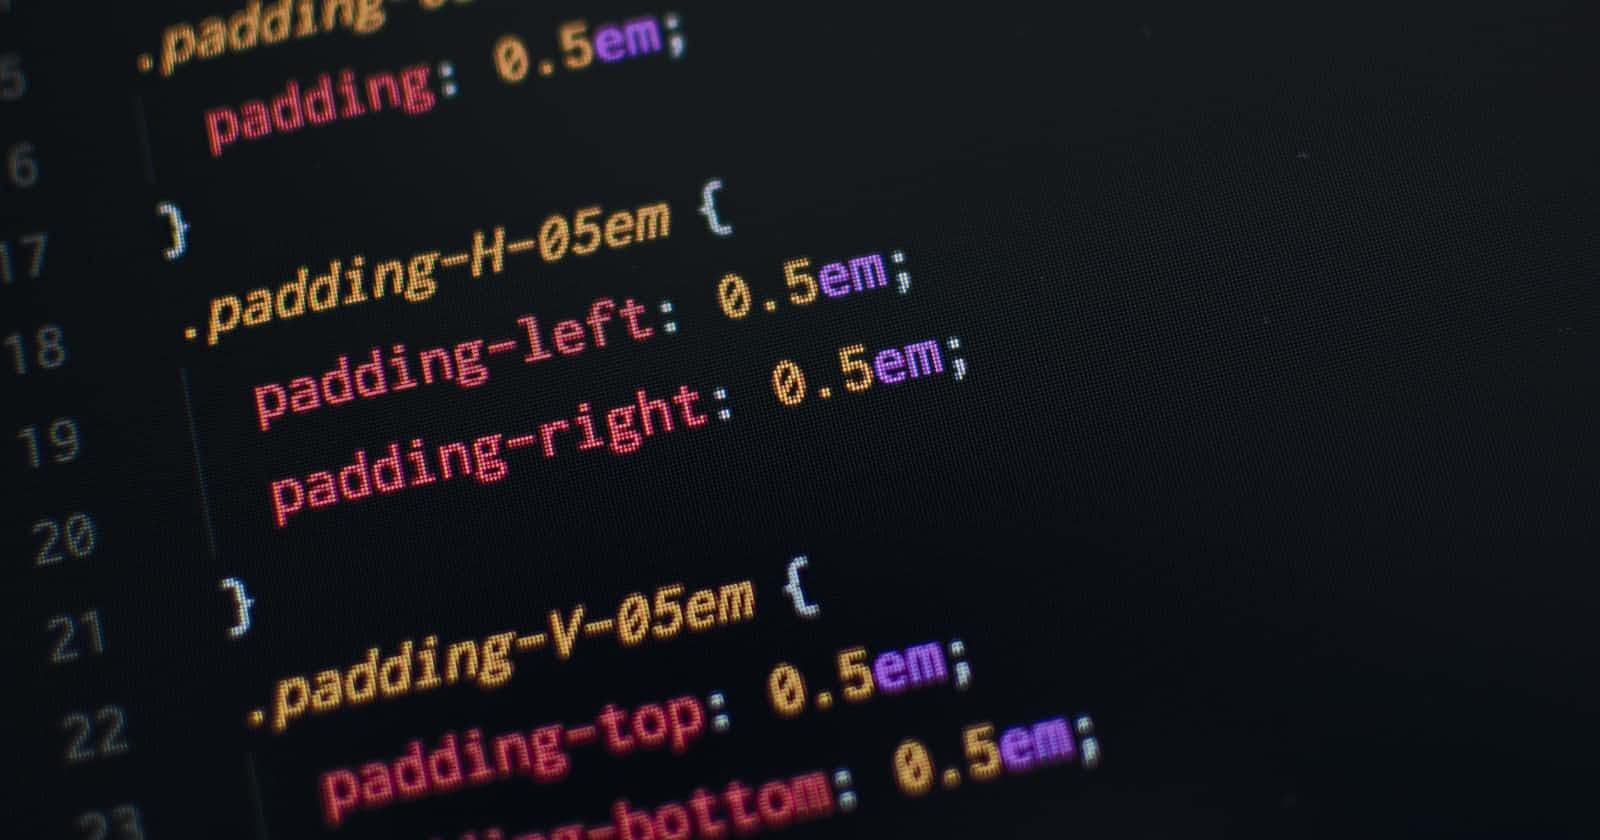 TIL: 2 CSS features I discovered today